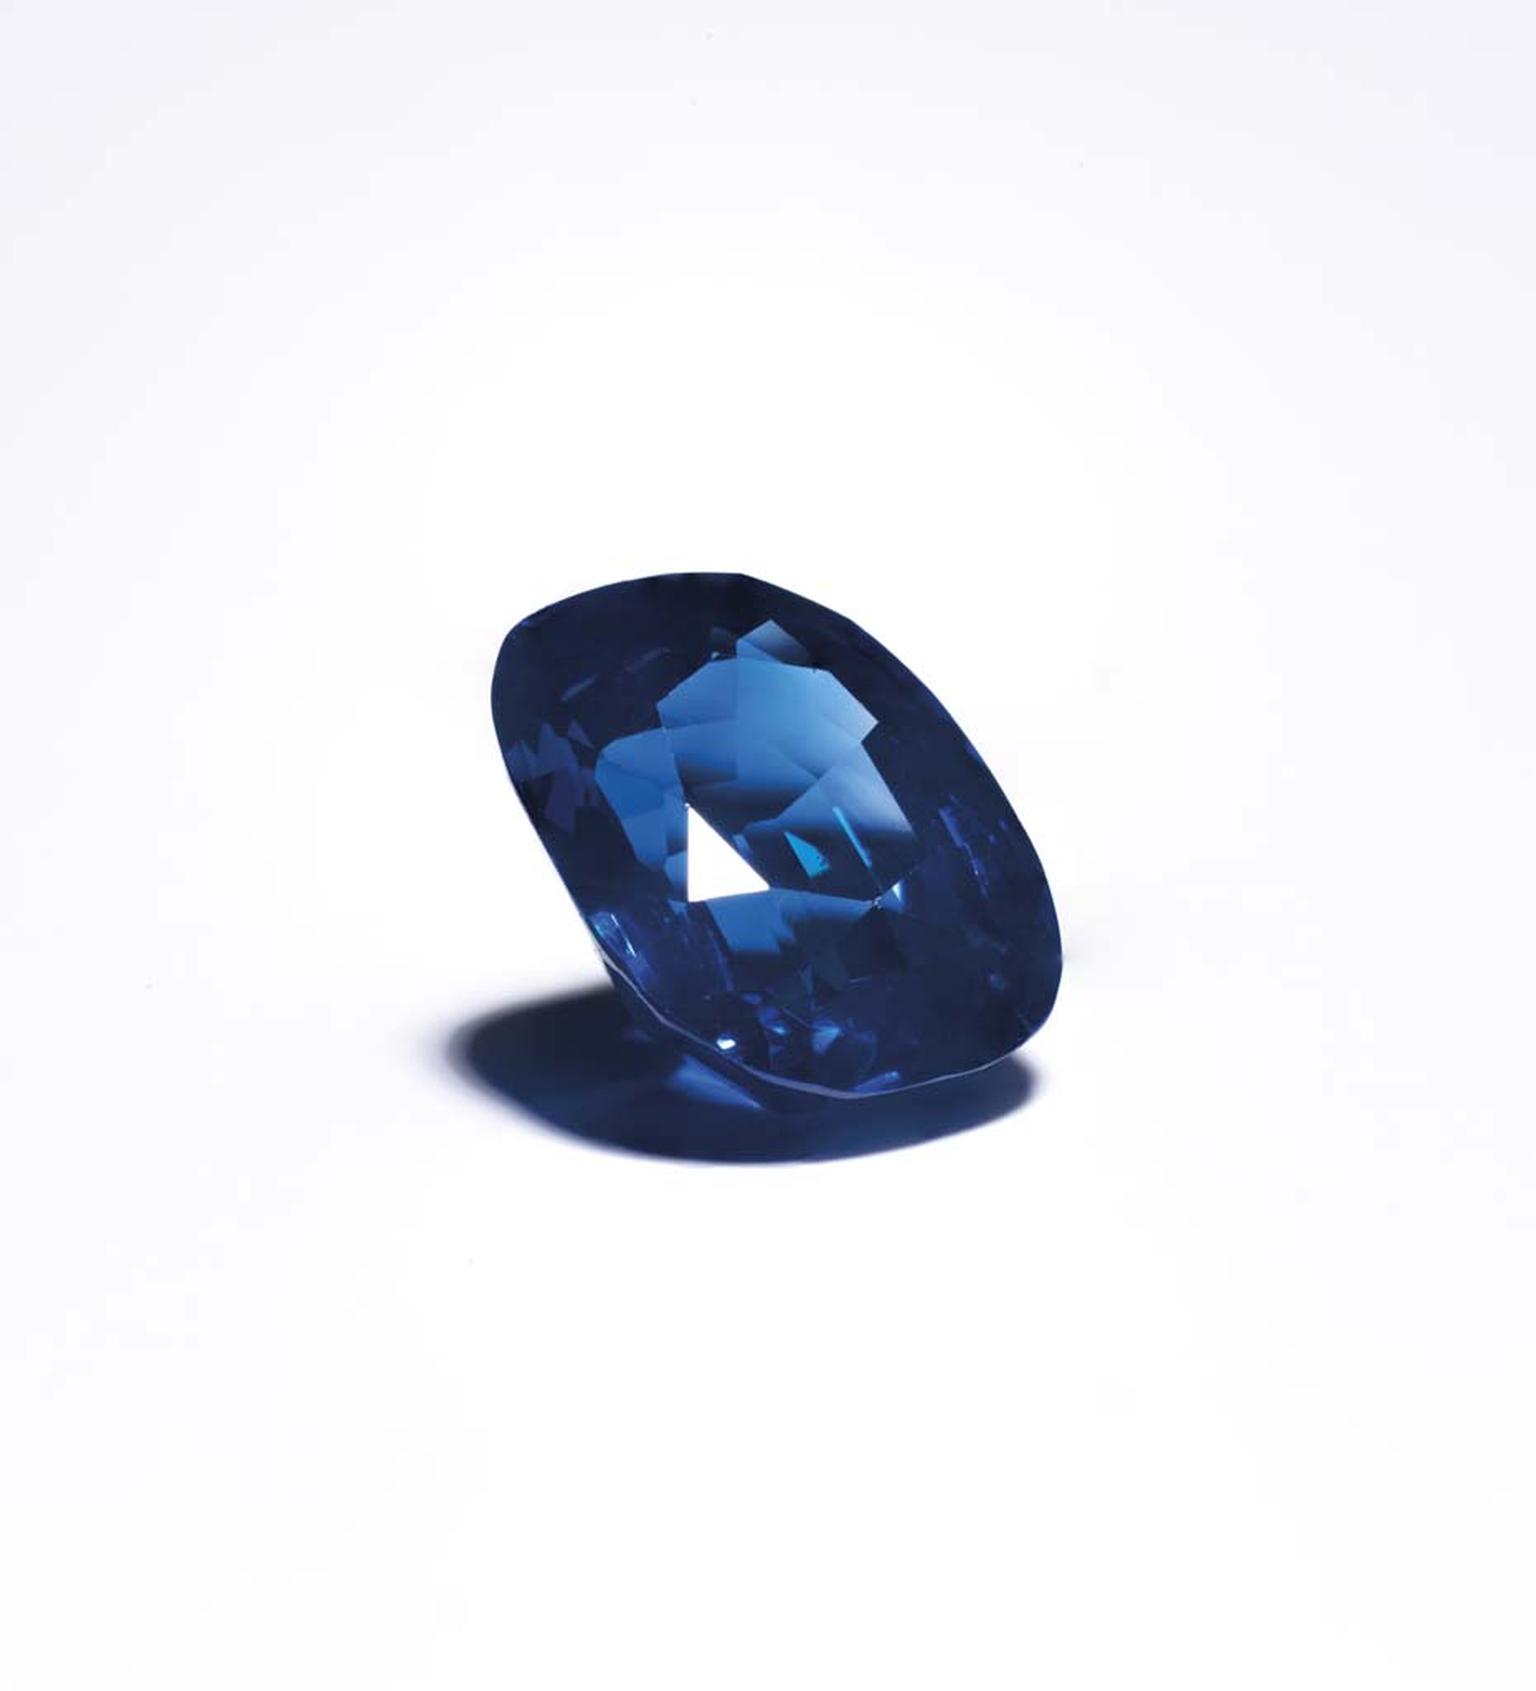 The star attraction at Christie's Important Jewels sale in London yesterday was the 14.66ct untreated sapphire known as The Royal Blue, which fetched £1,398,500 (estimate: £400,000-£500,000).